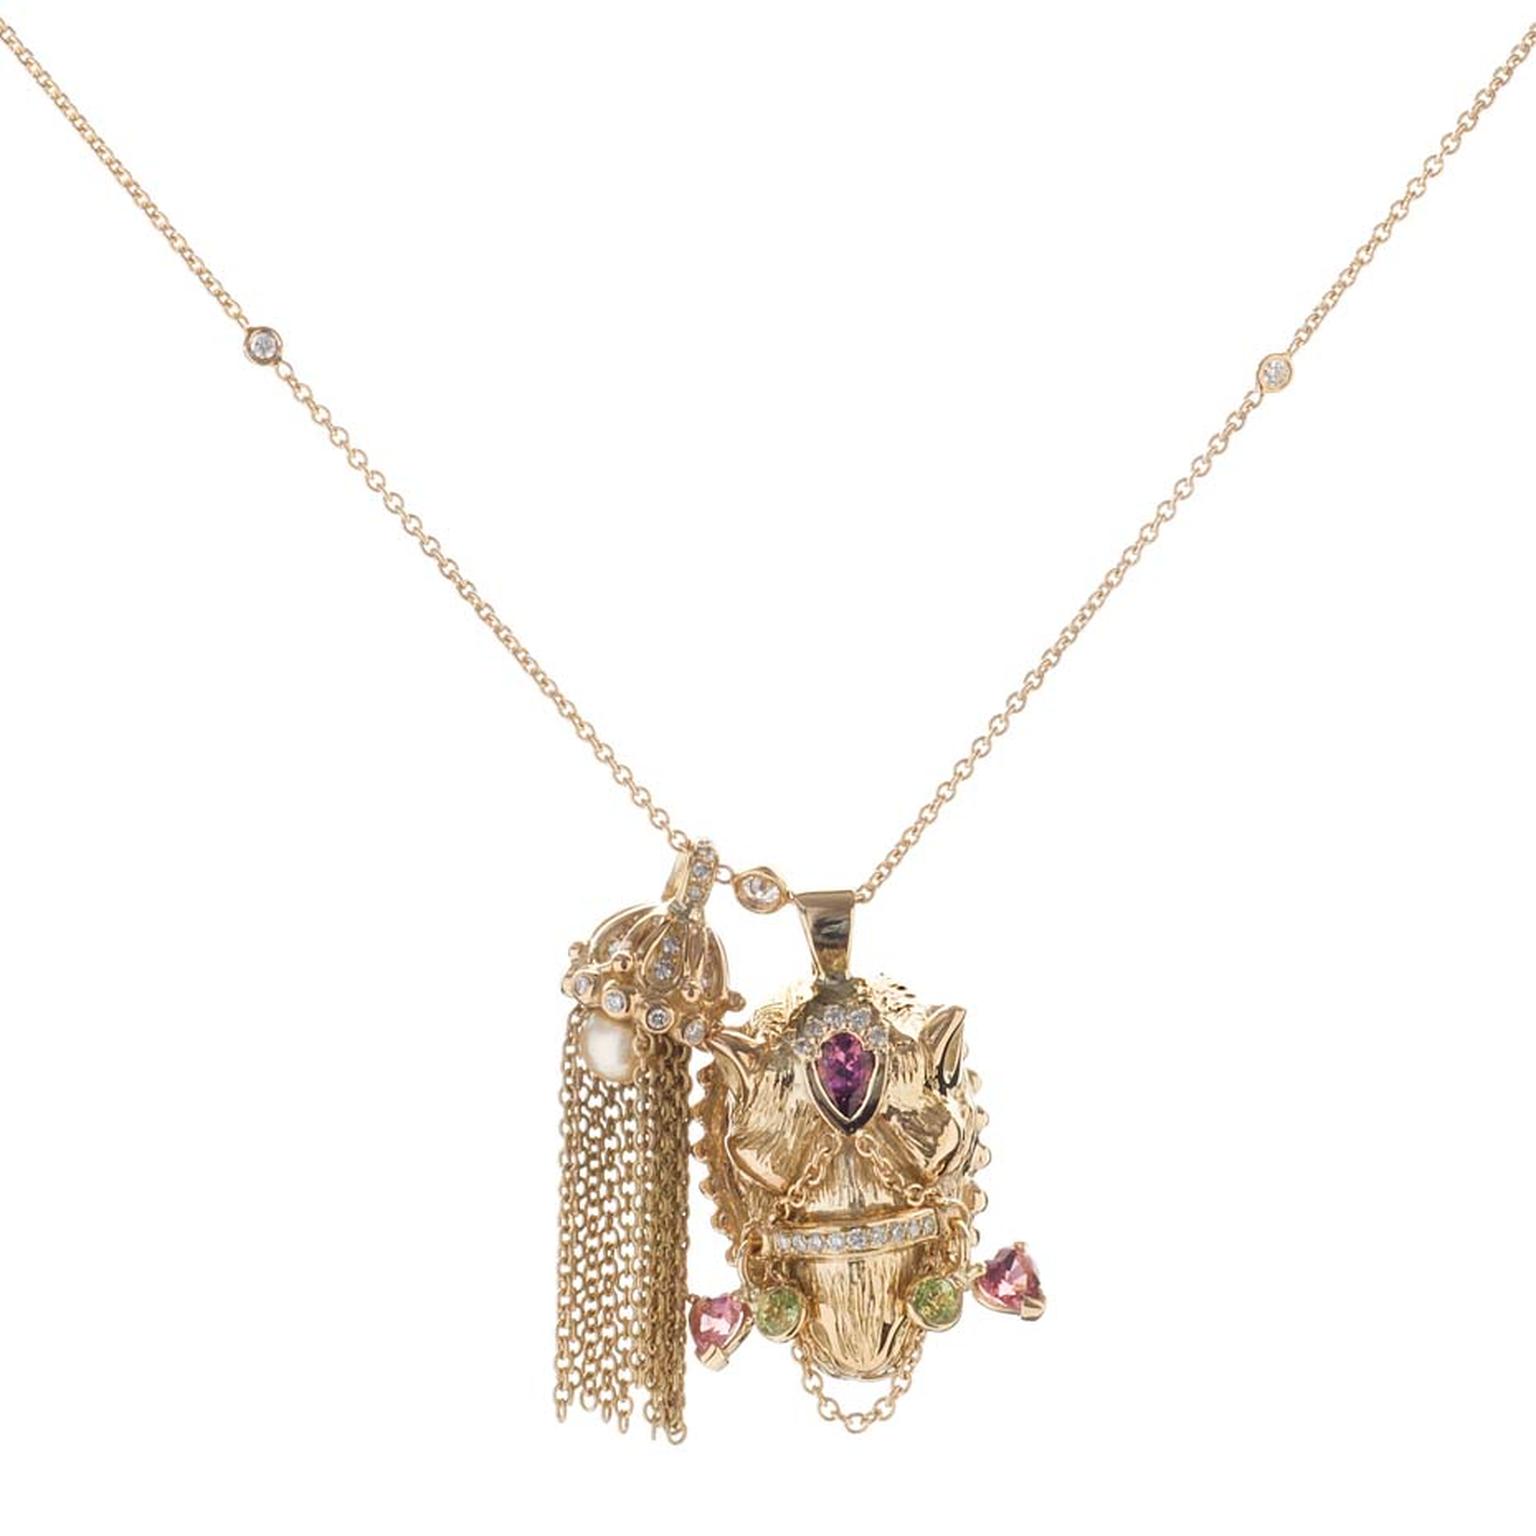 Sabine Roemer Parazide tassel Camel pendant in yellow gold, set with green peridots, pink tourmalines and a golden pearl